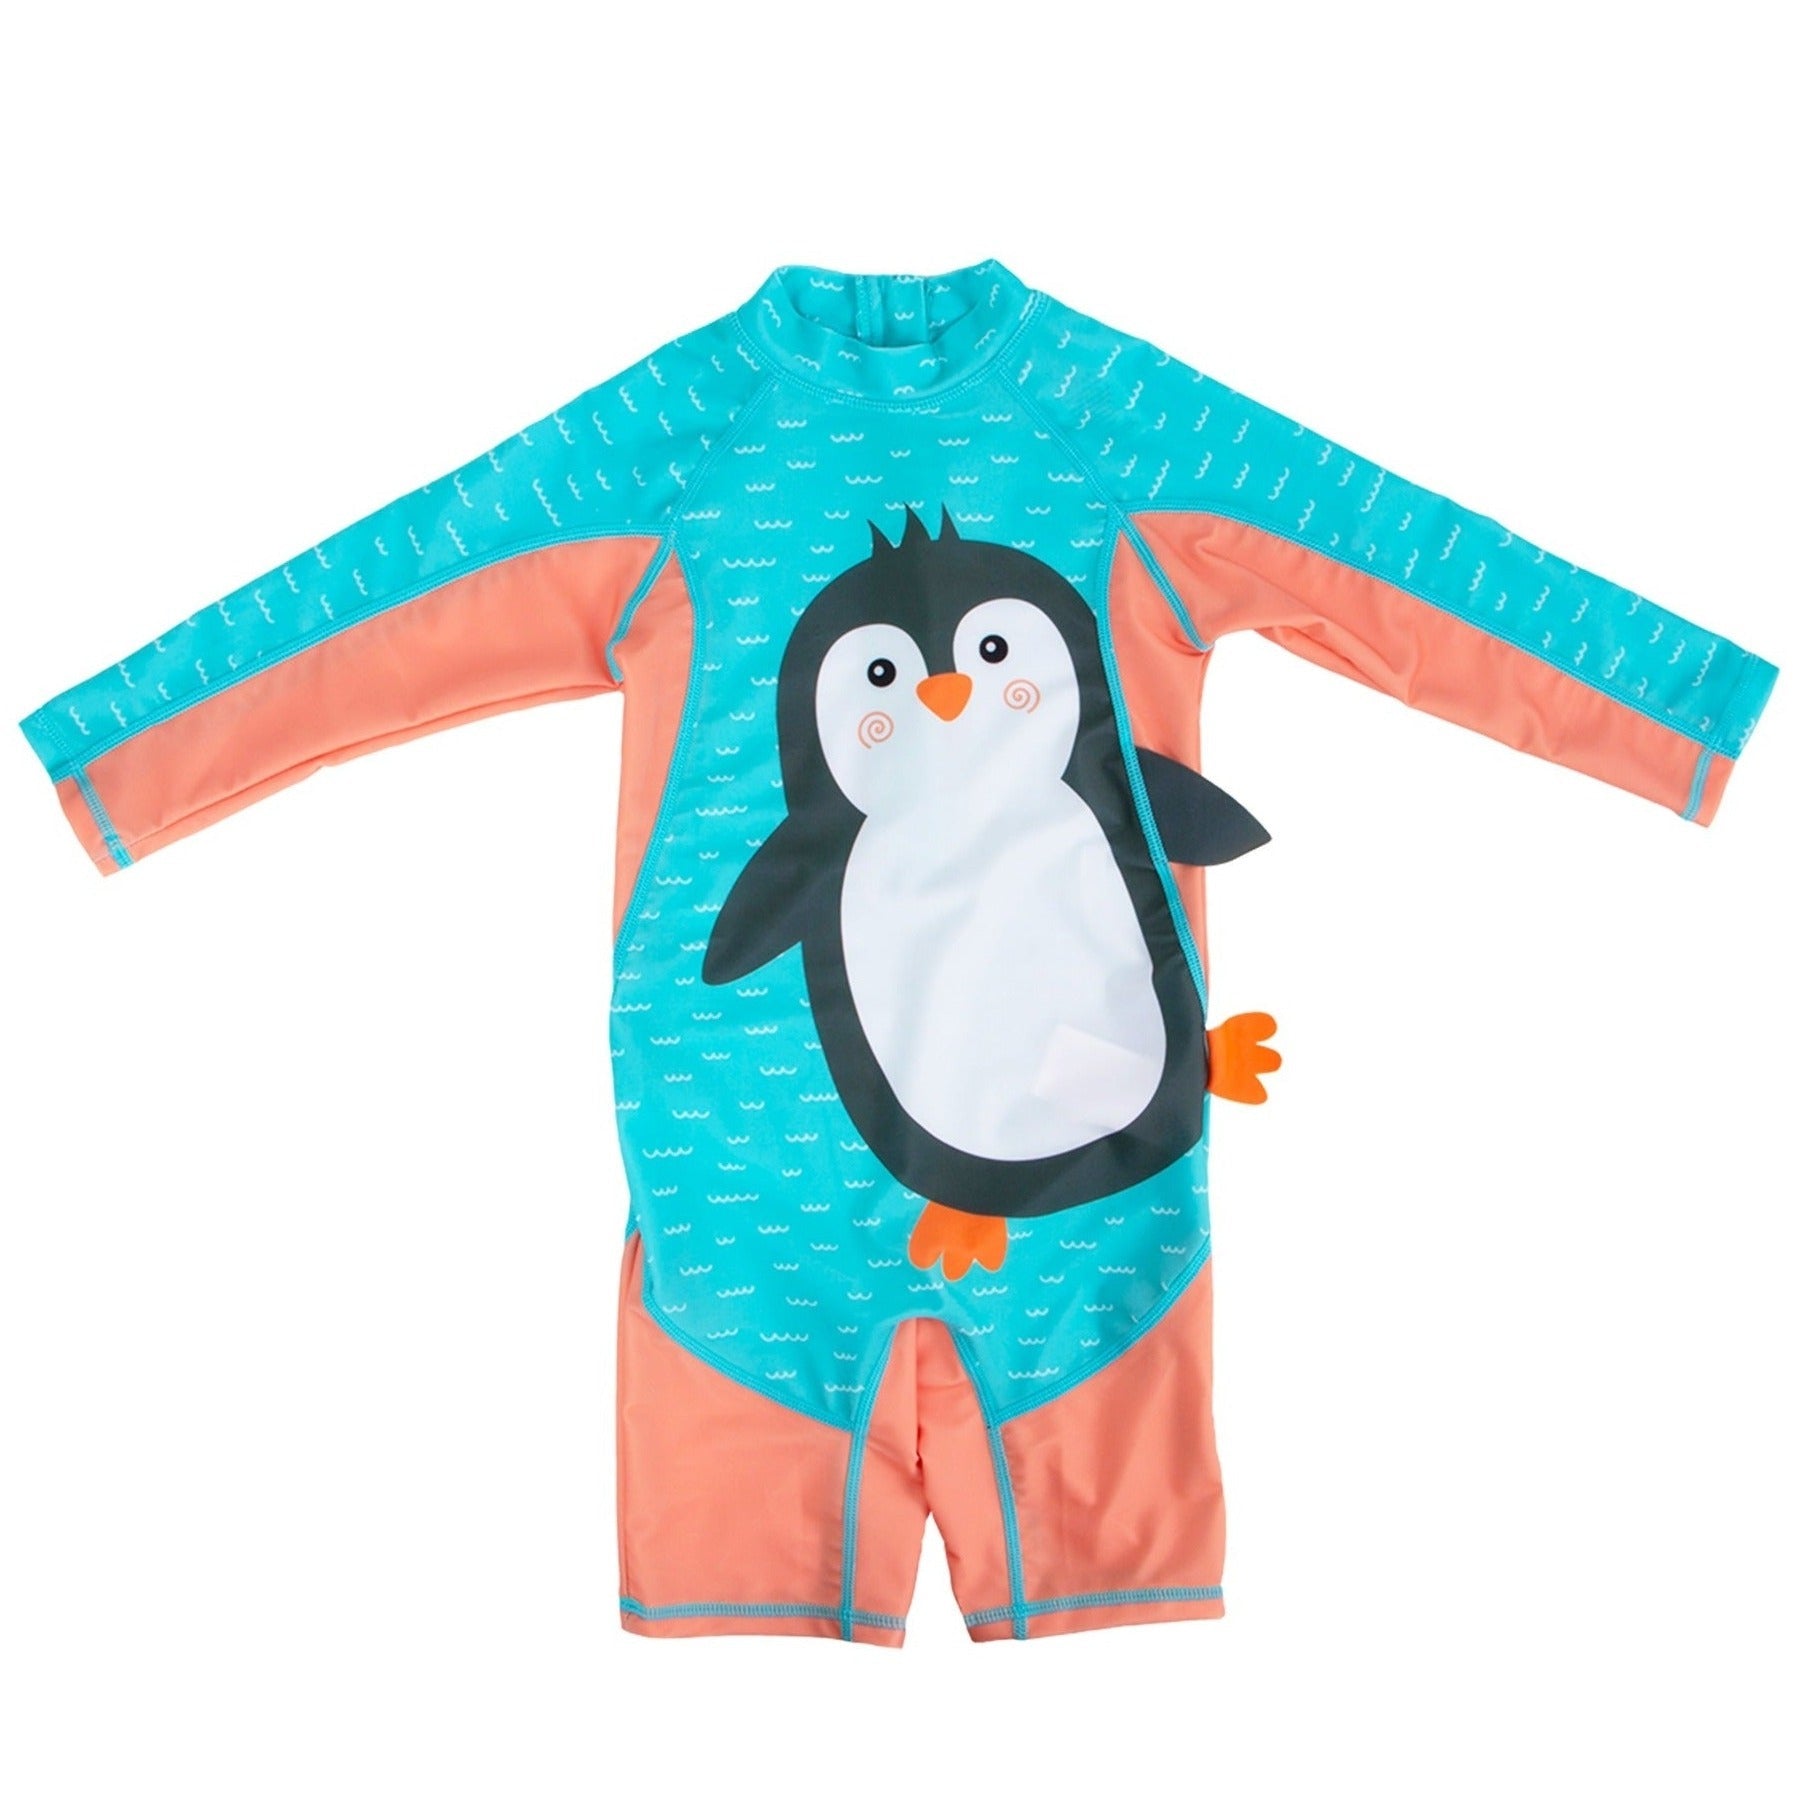 Baby/Toddler Rash Guard One Piece Swimsuit - Penguin